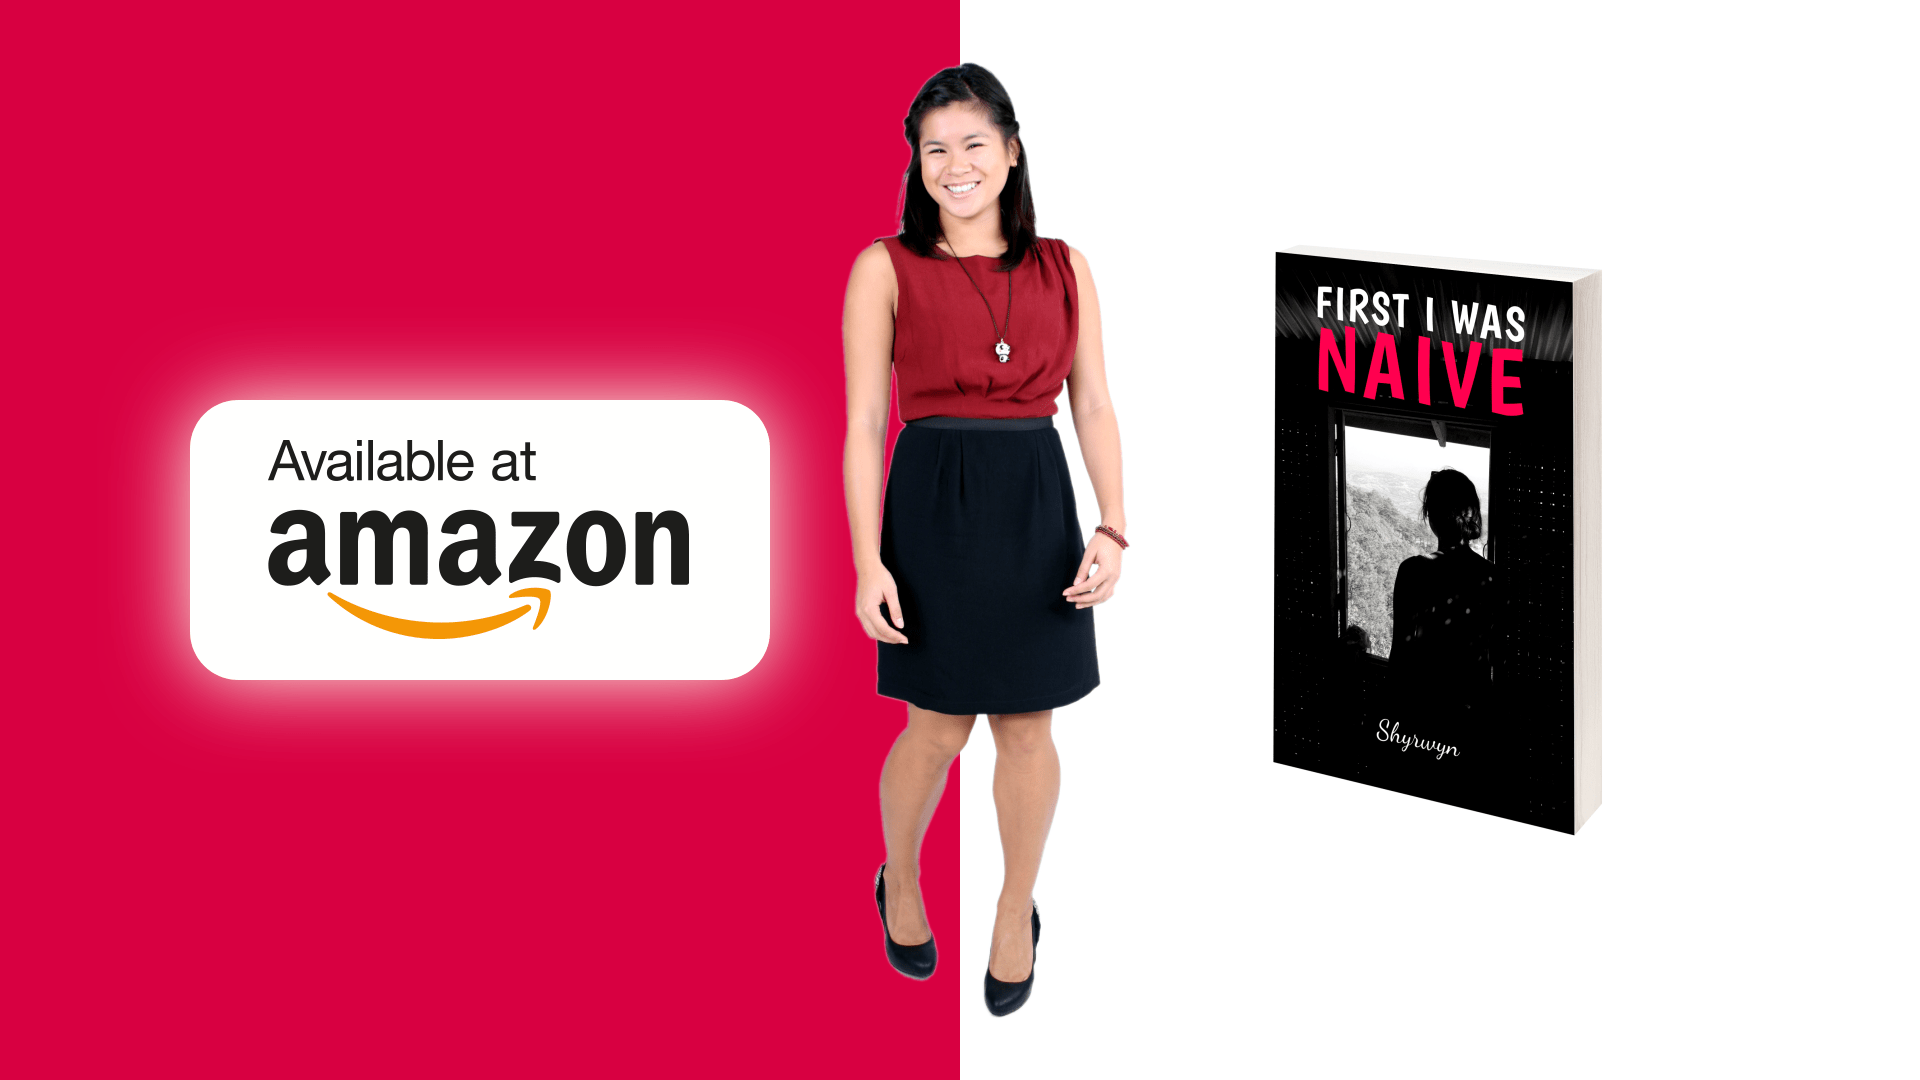 First I Was Naive (book) by Shyrwyn Clemente - Available at Amazon.com: https://www.amazon.com/dp/B077XLWT8G